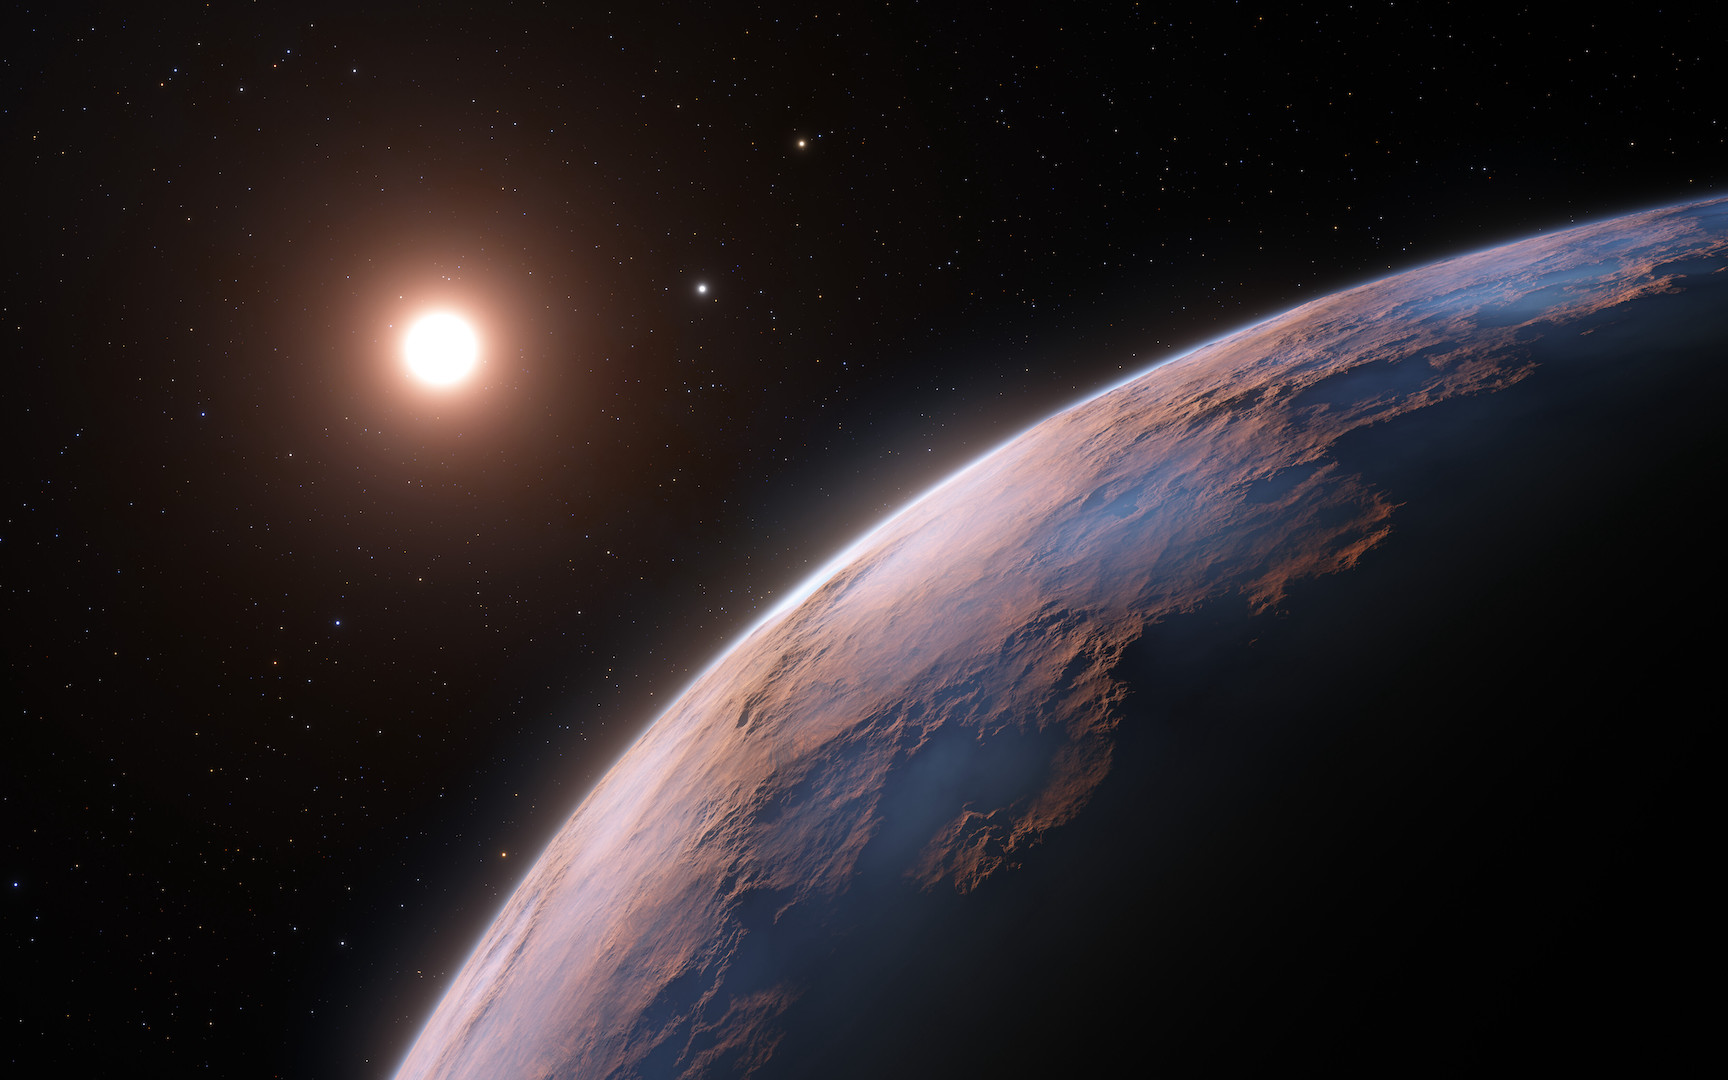 Artist's impression of the Proxima d exoplanet candidate